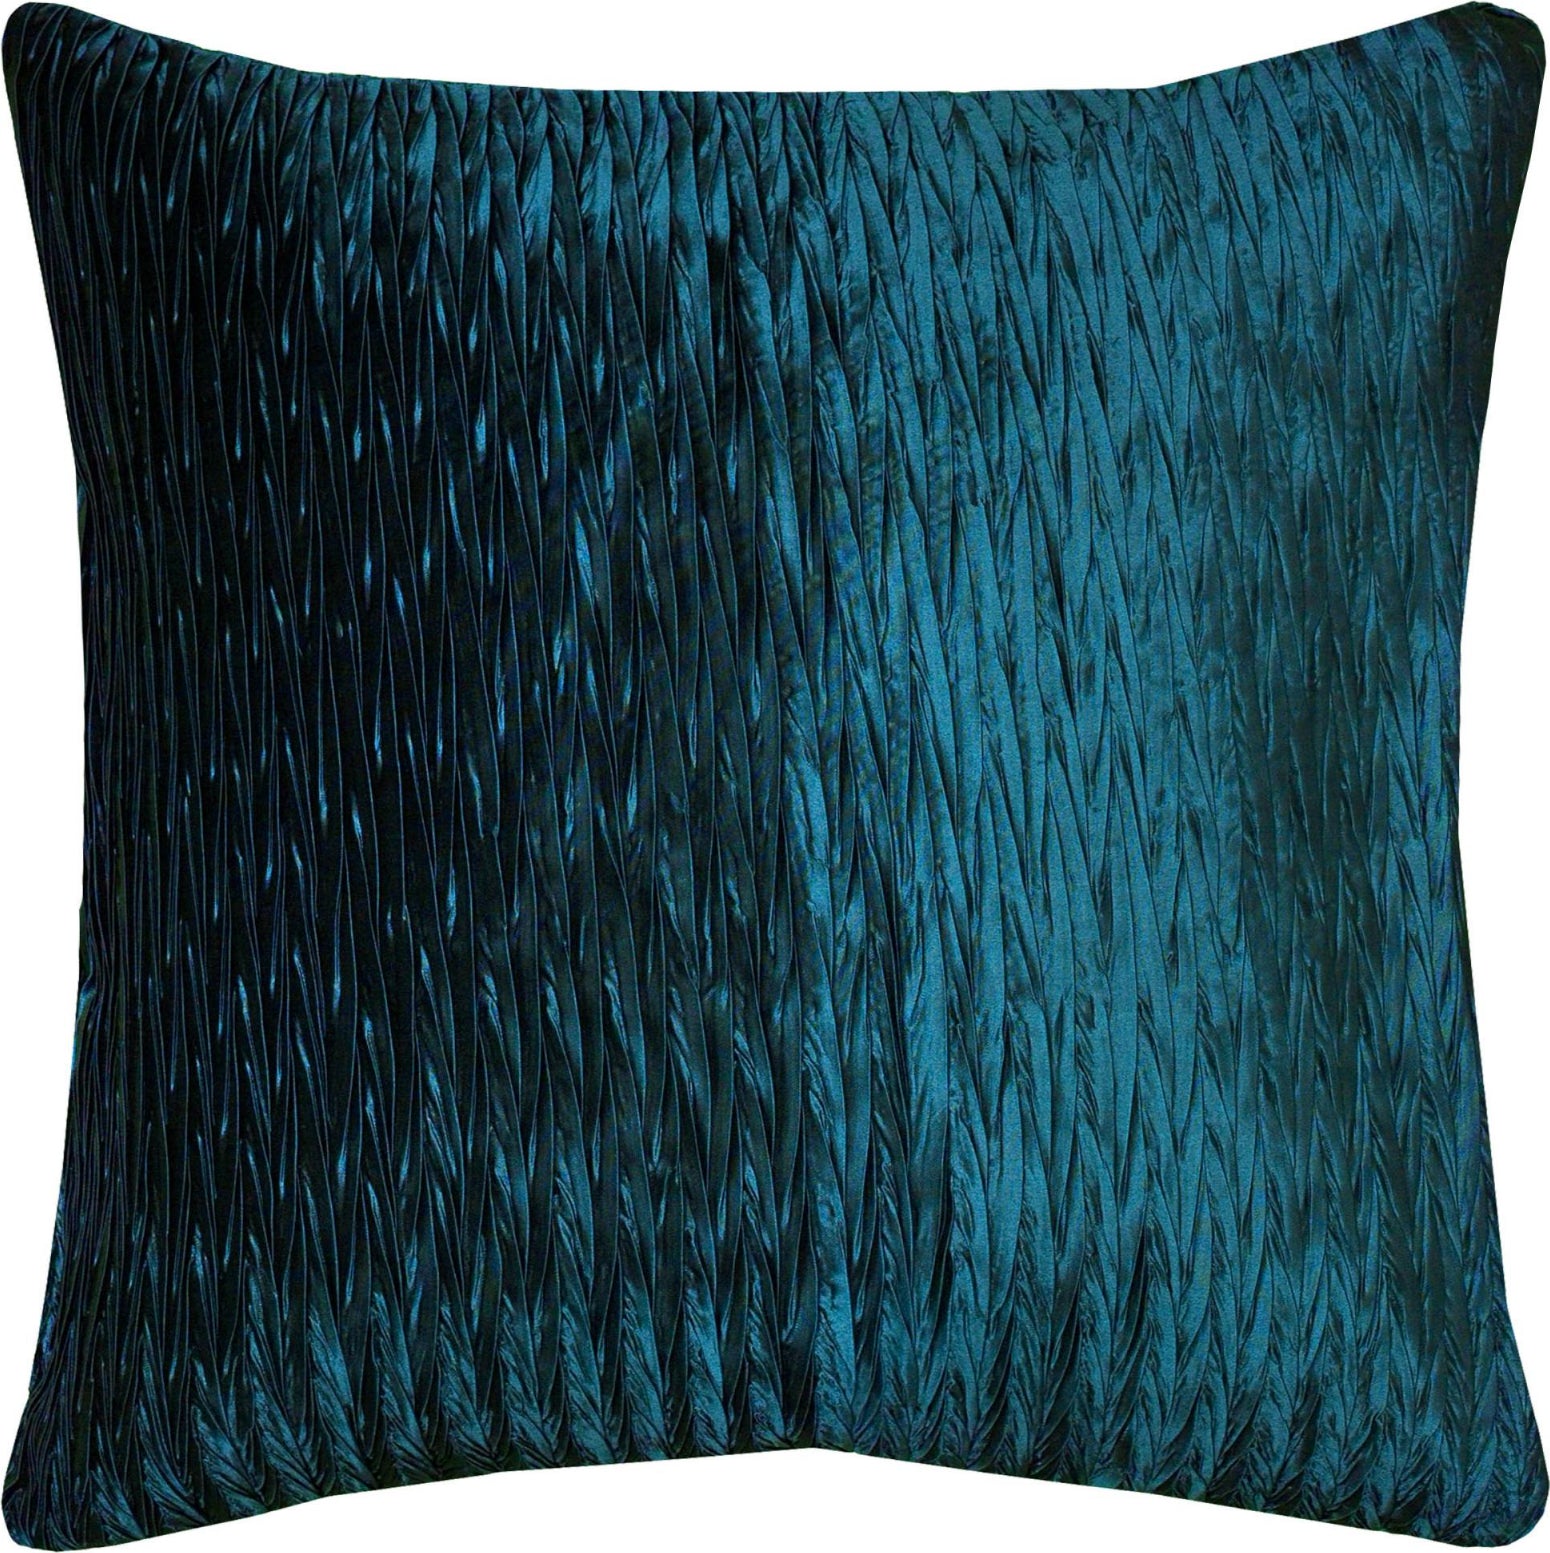 Rizzy Pillows T06485 Peacock Blue